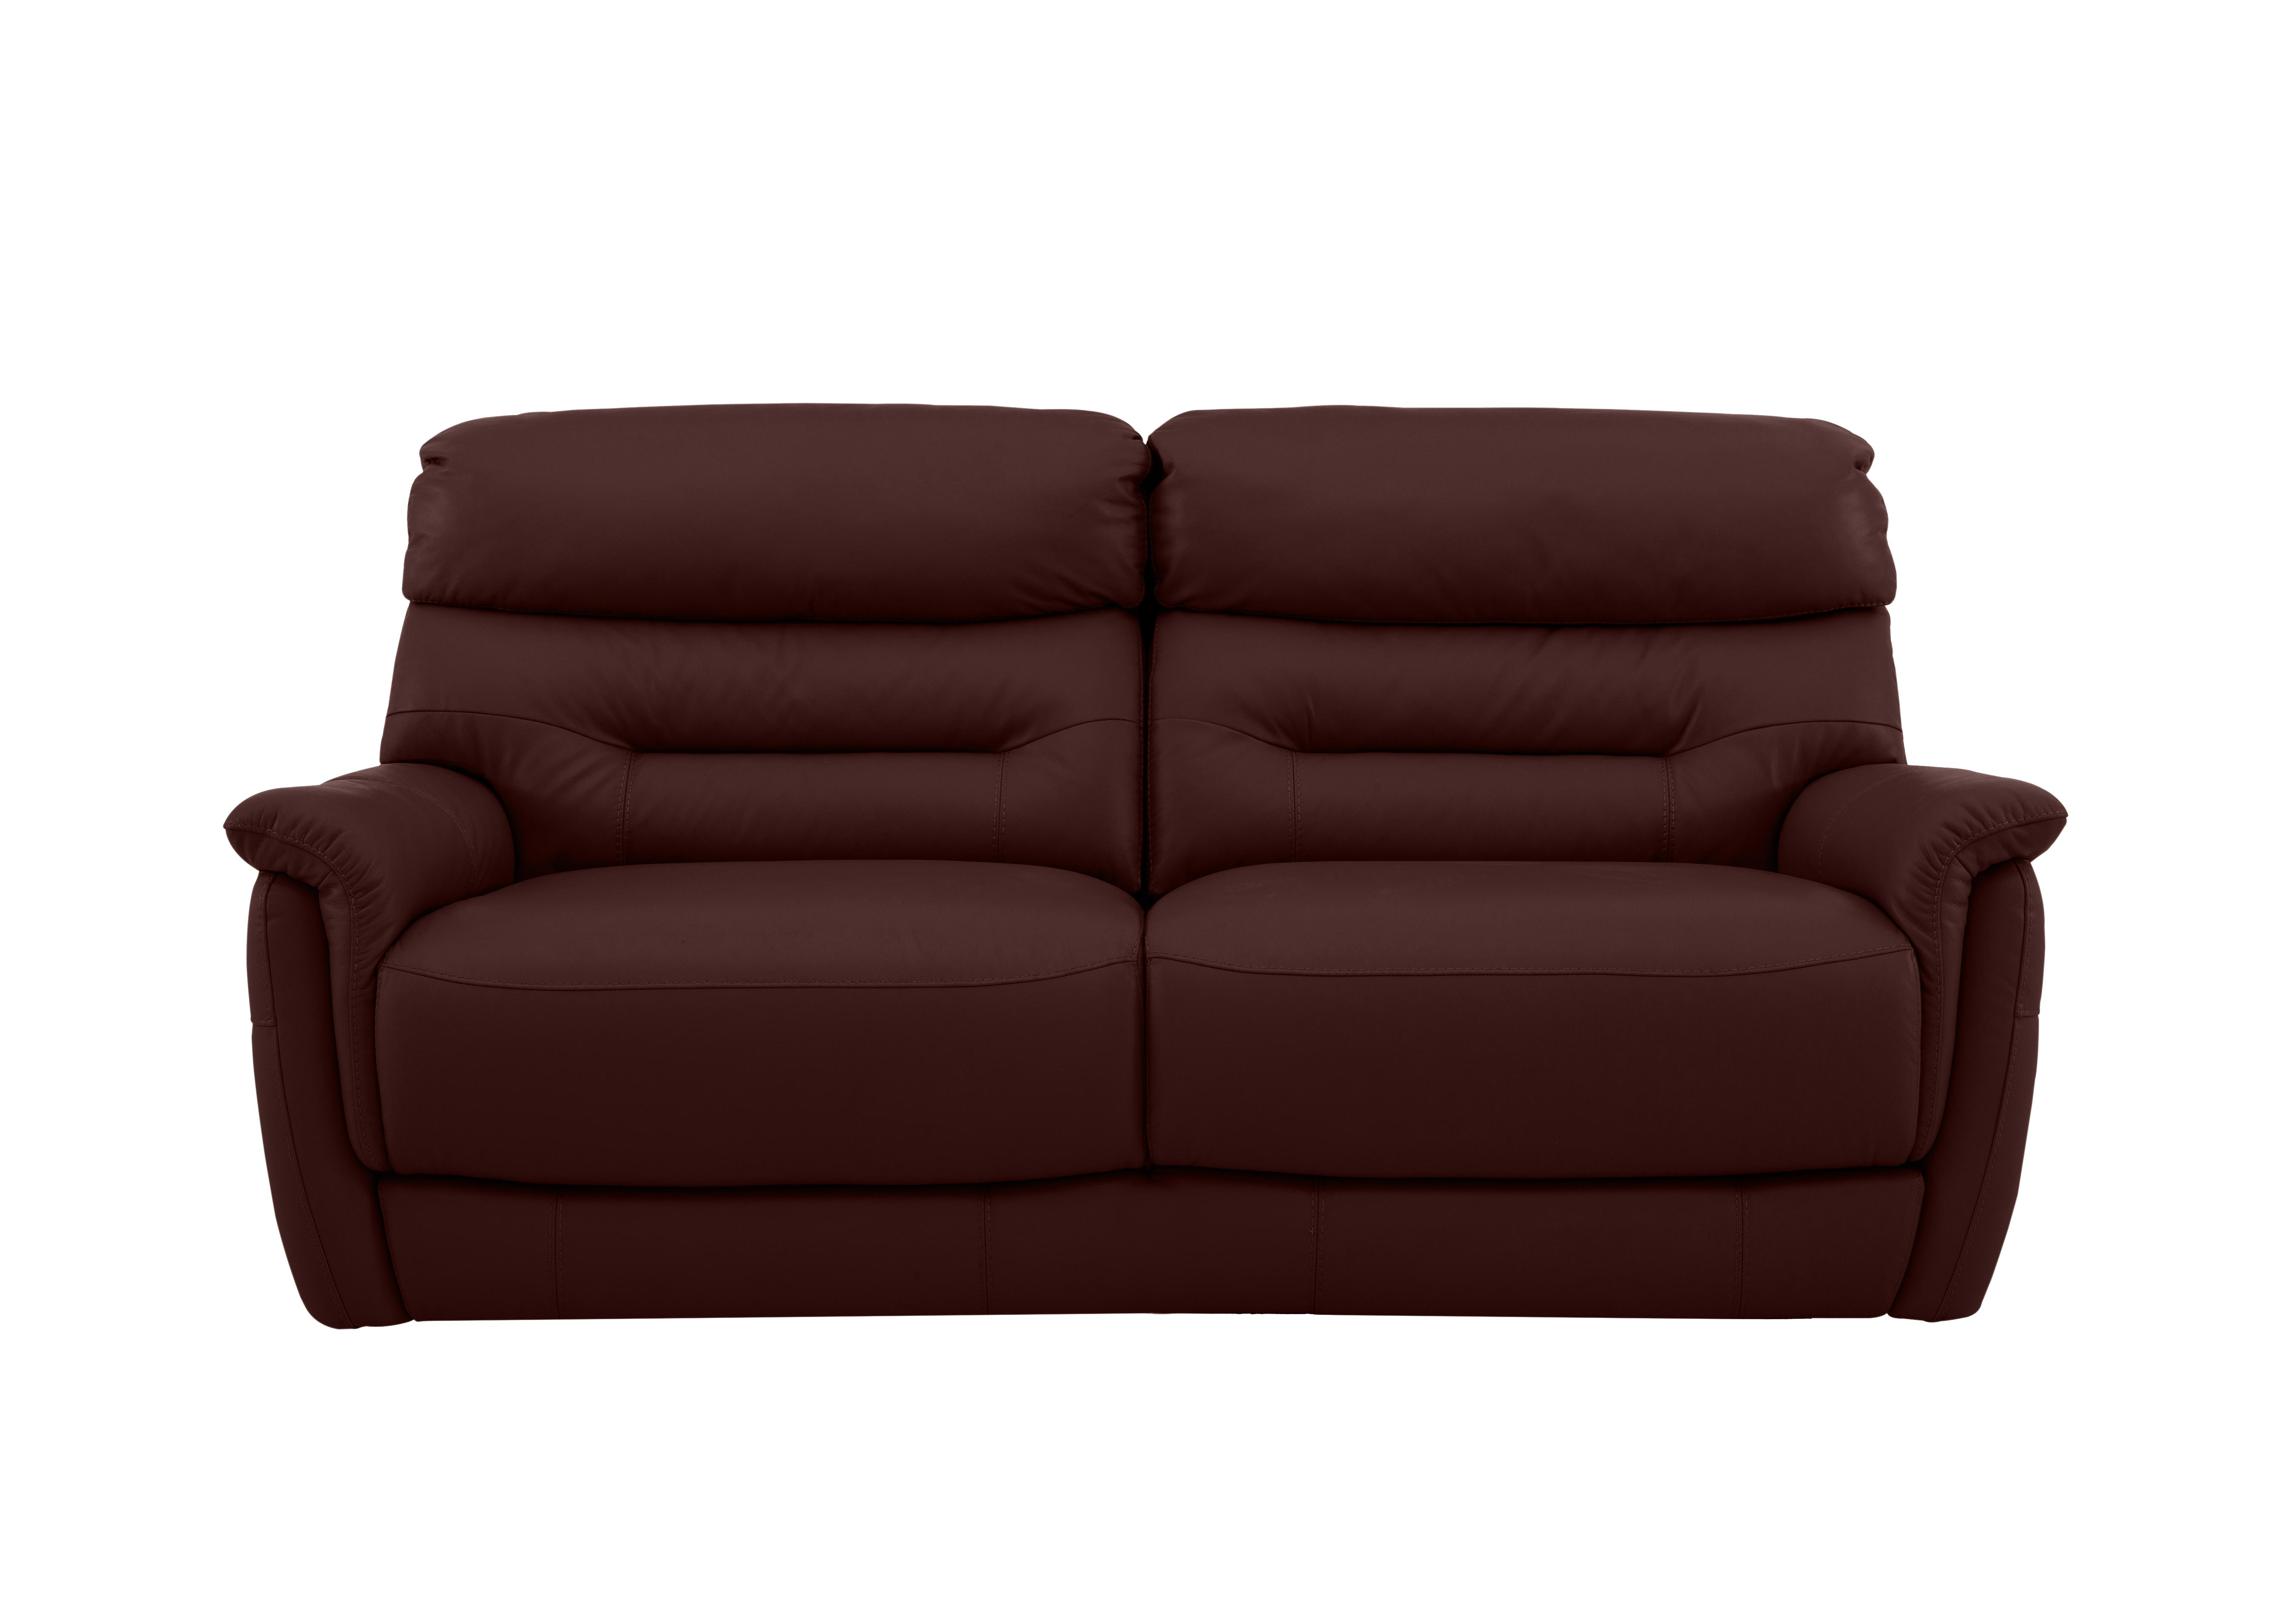 Chicago 3 Seater Leather Sofa in An-751b Burgundy on Furniture Village